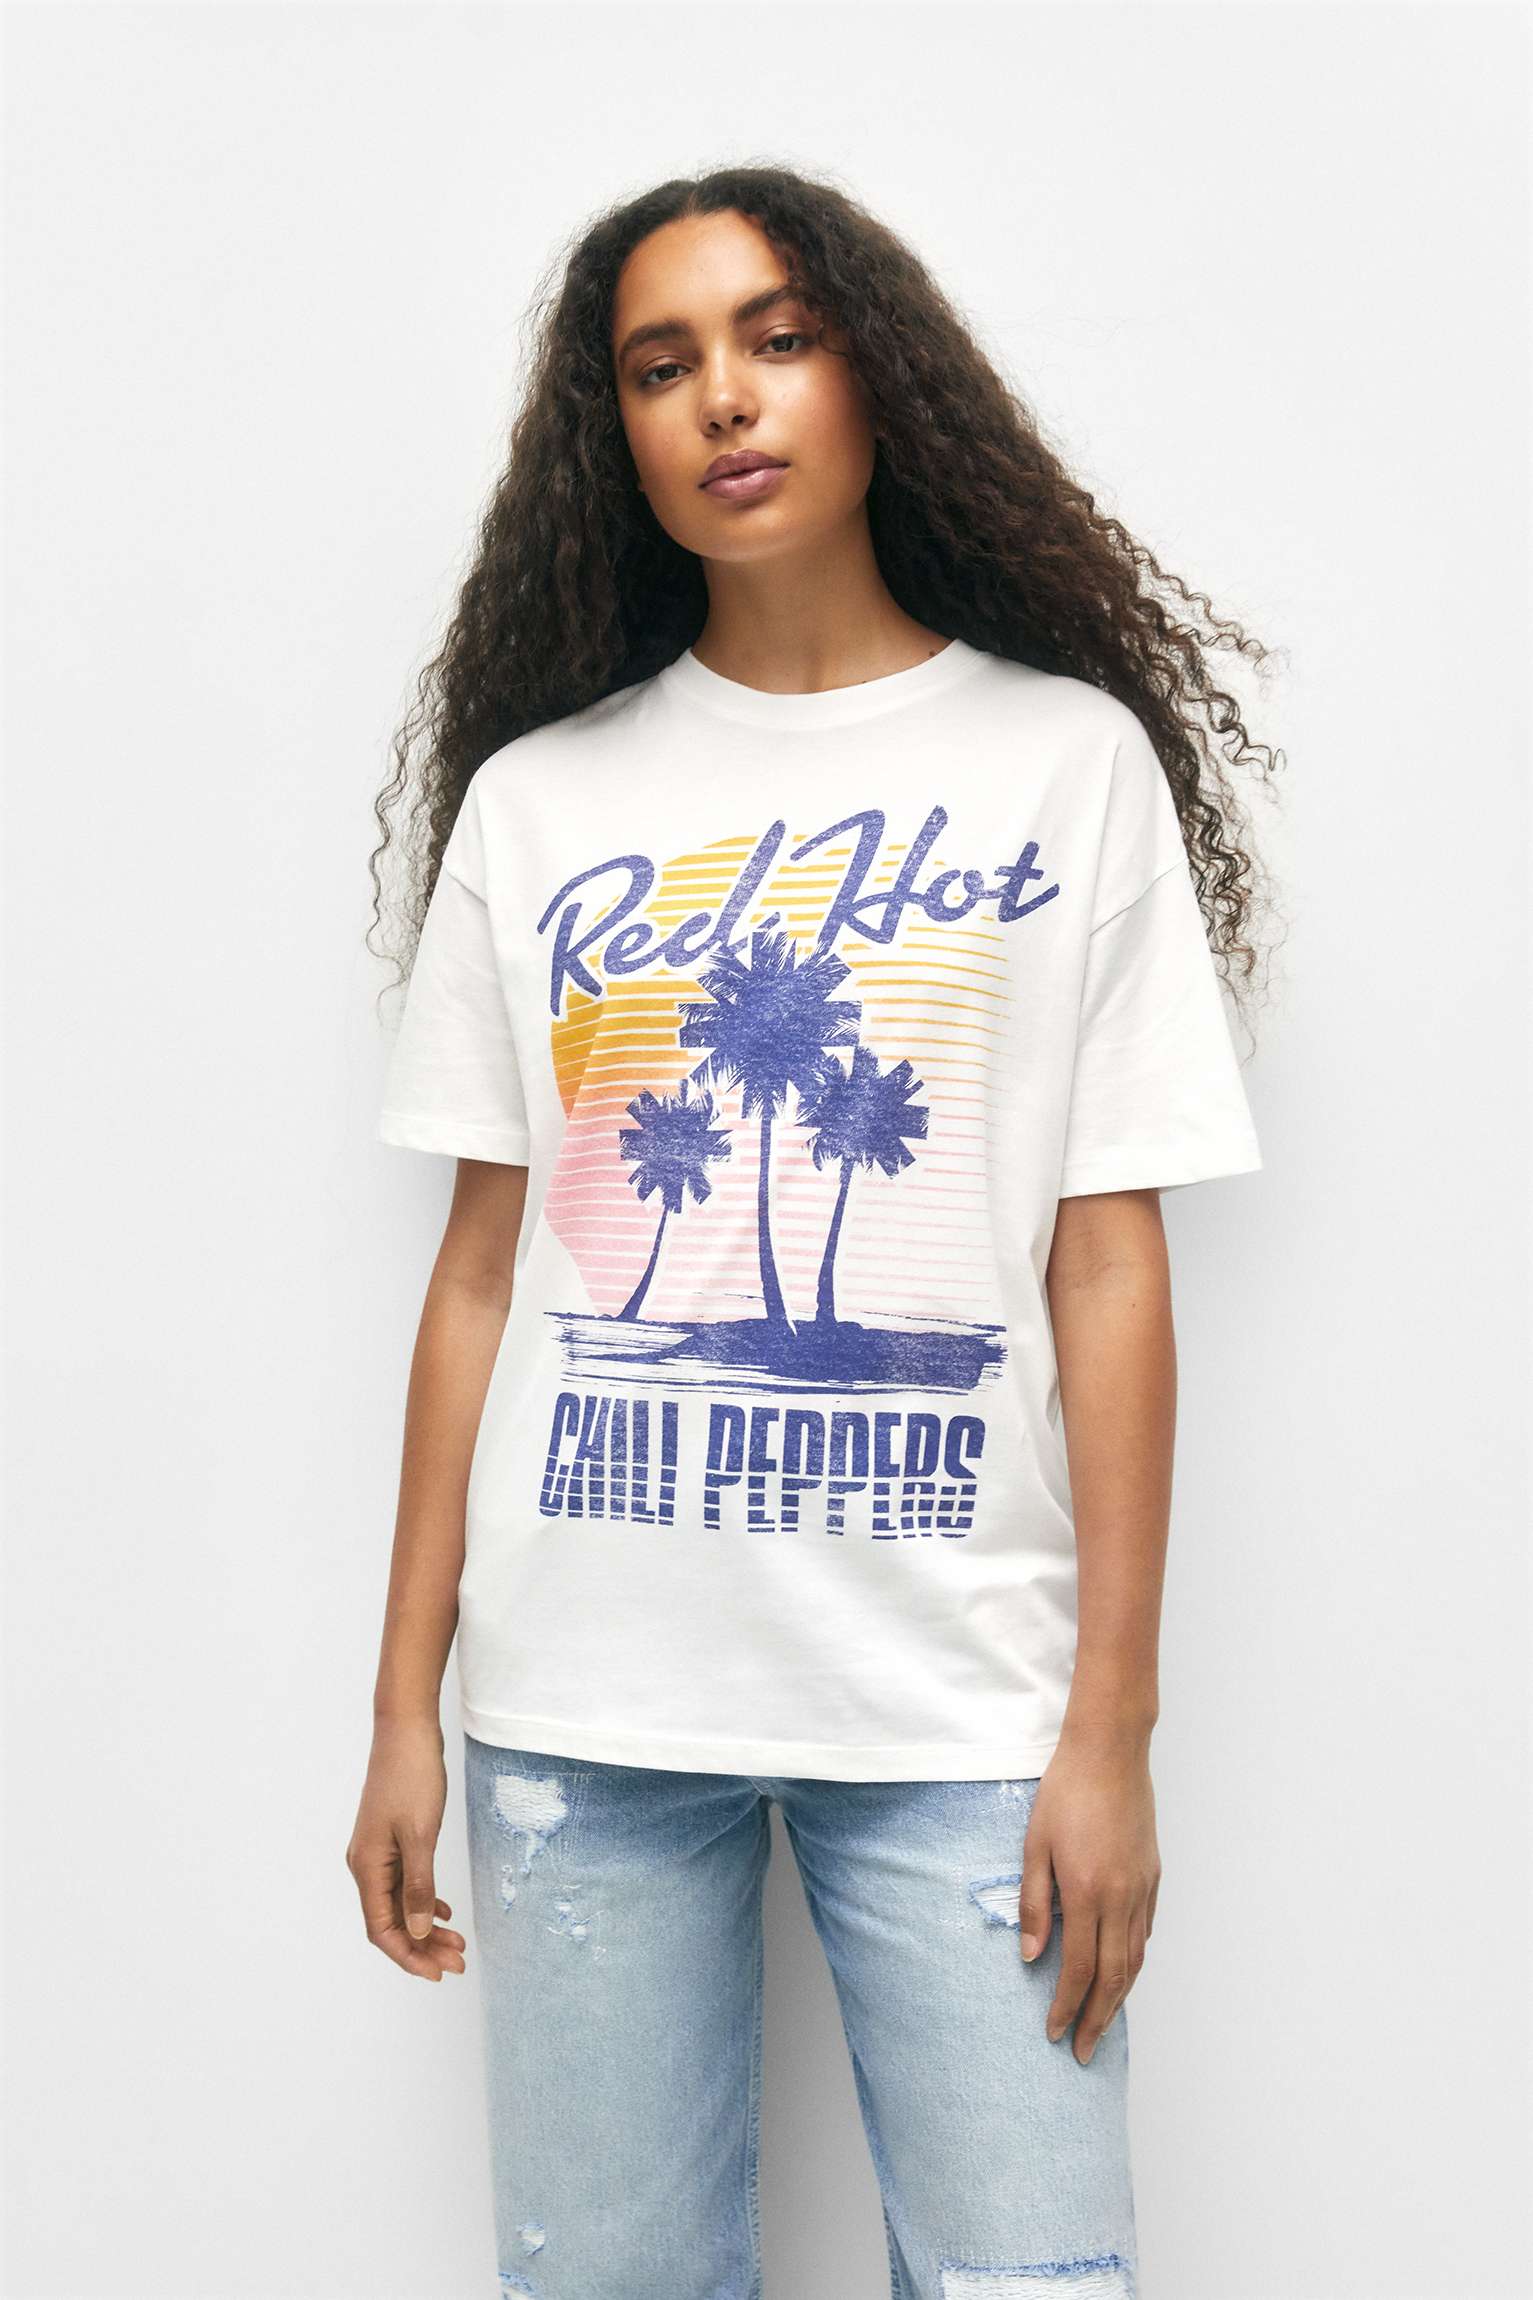 Red Hot Chili Peppers T shirt